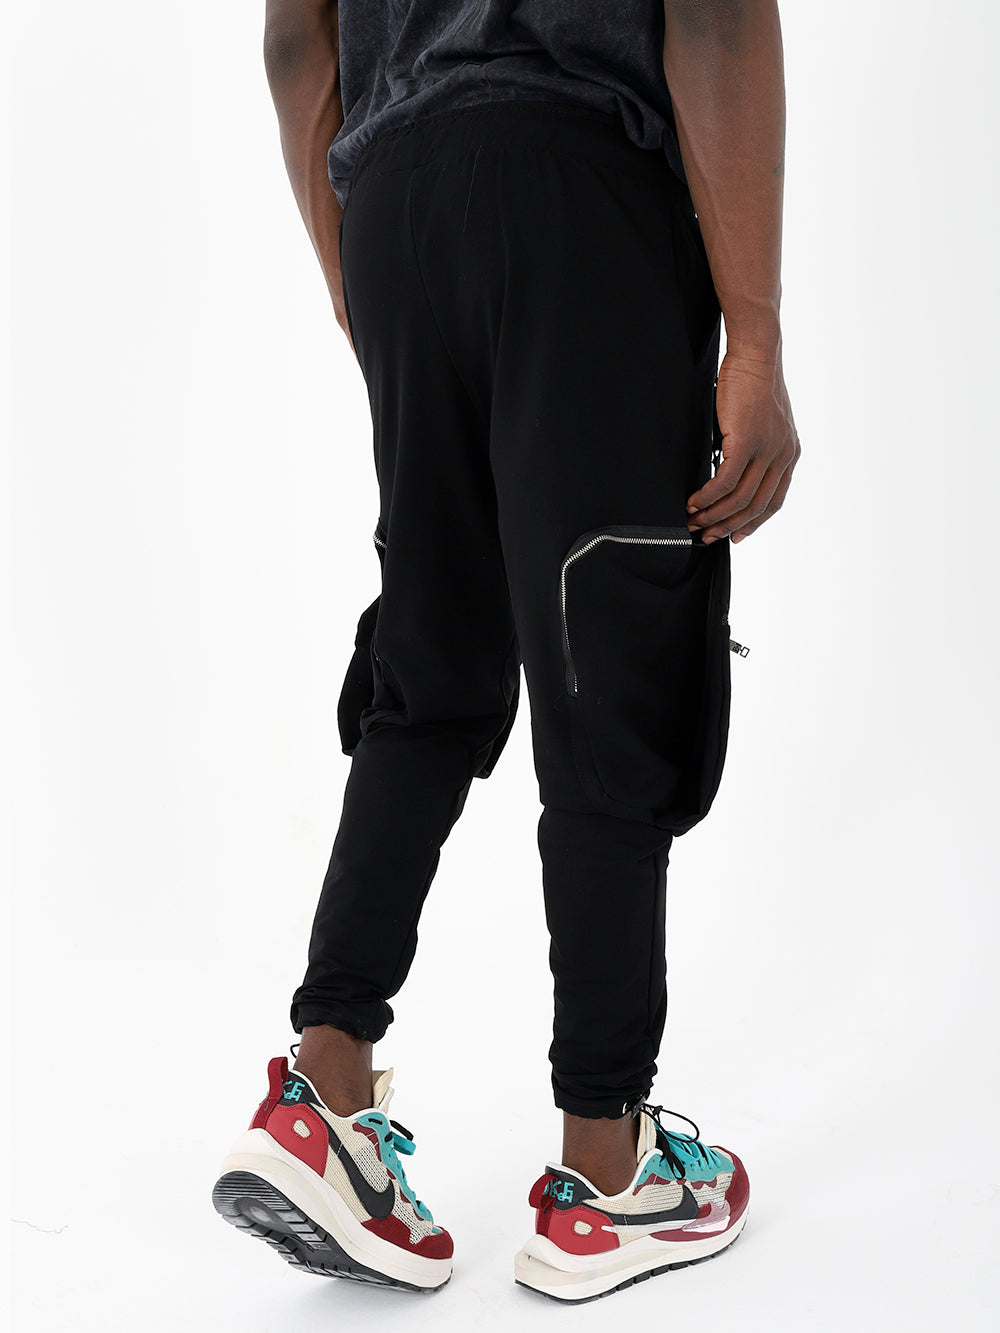 Brooklyn Jogger Pants  Shop Women's Joggers for Comfort & Style